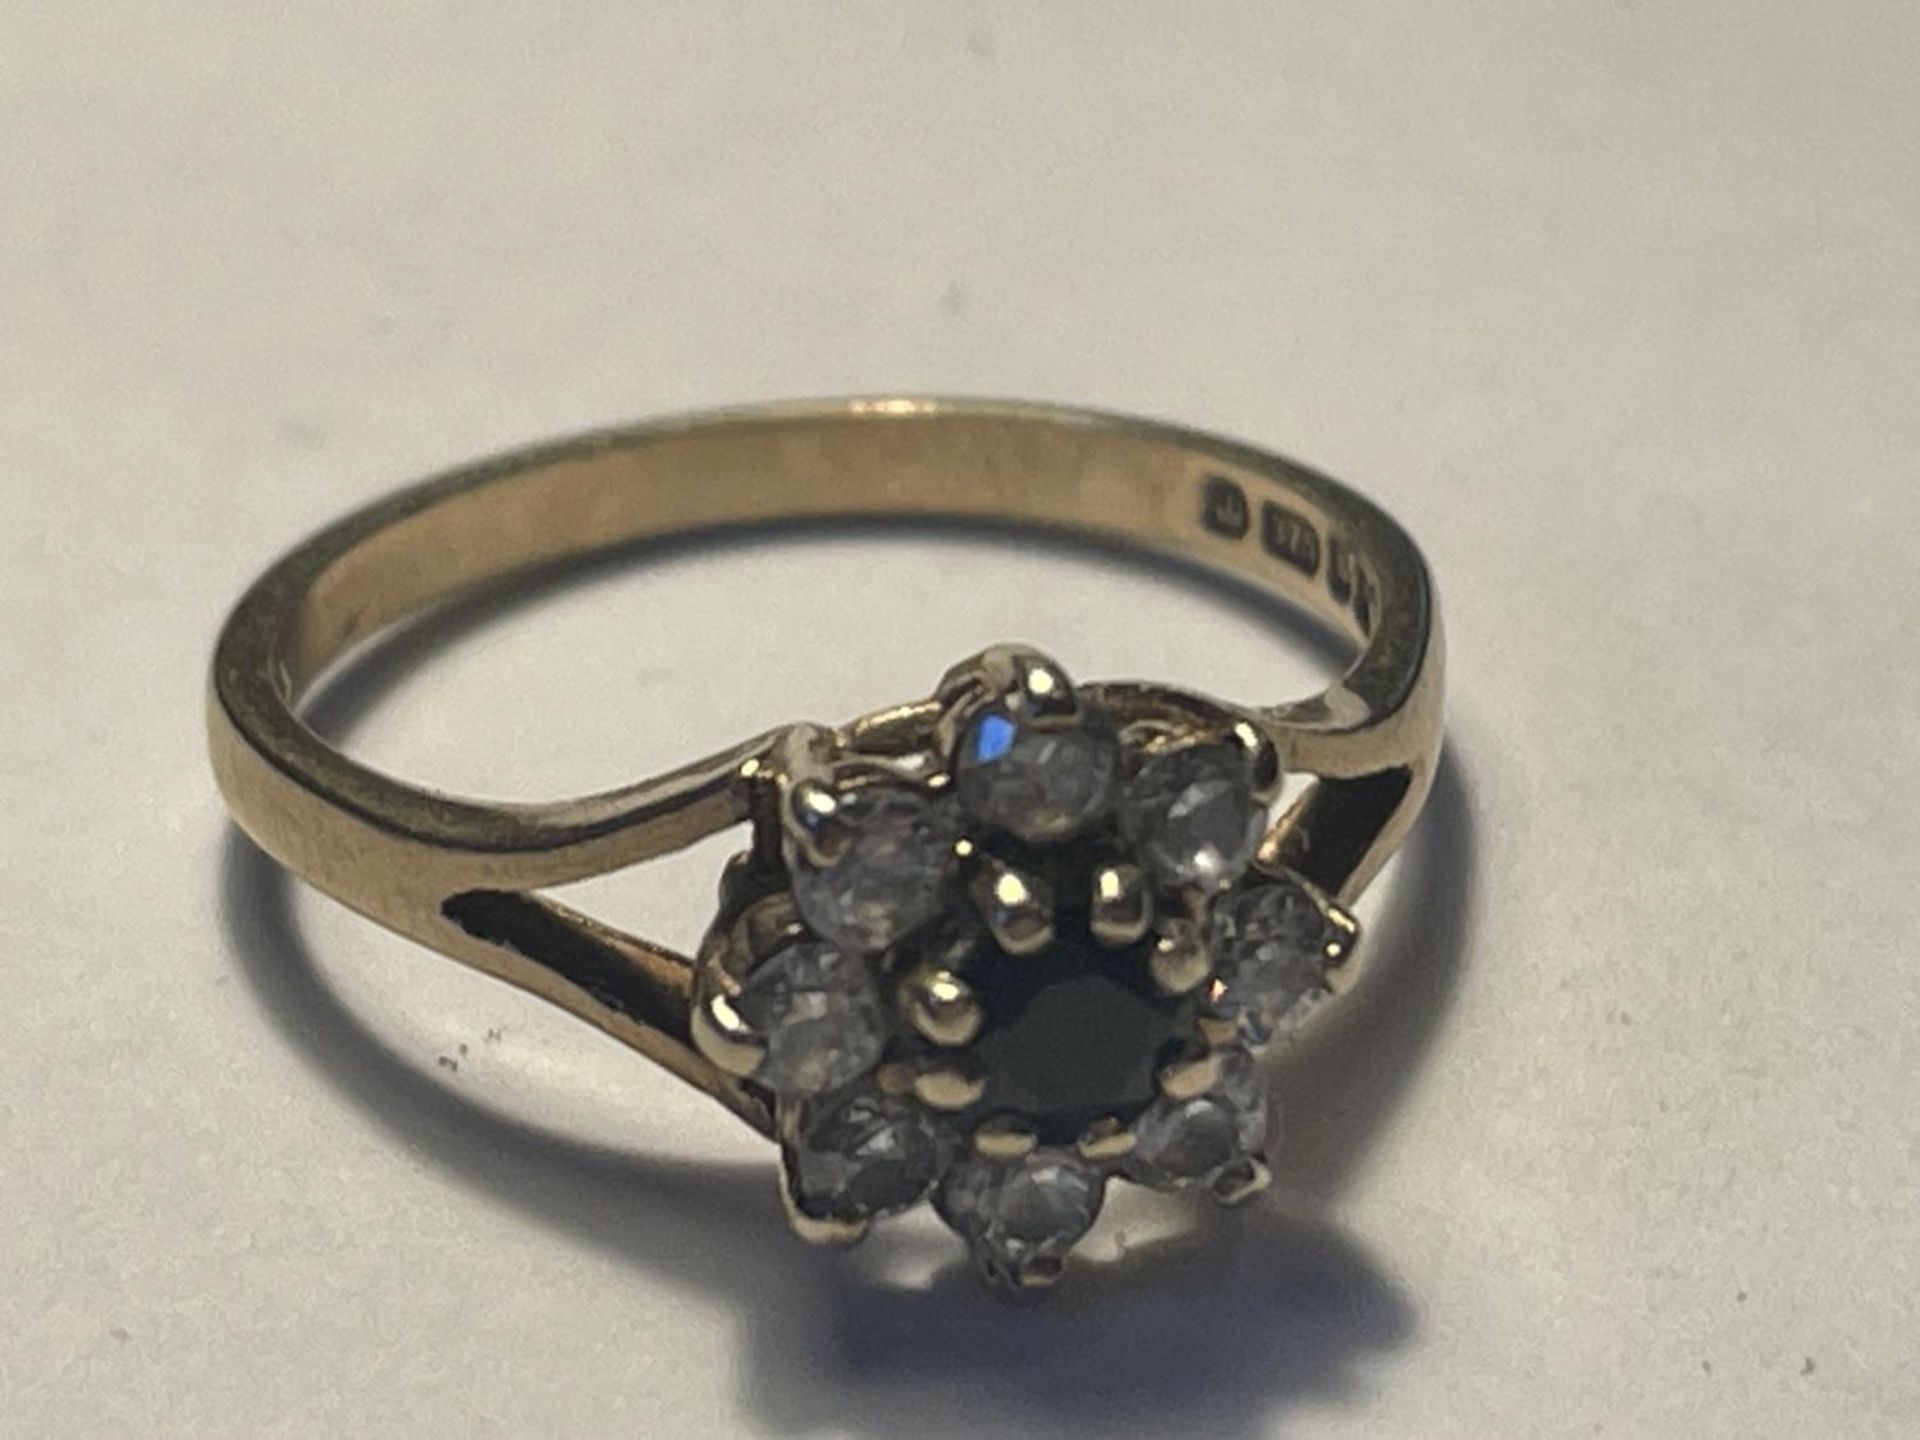 A 9 CARAT GOLD RING WITH A CENTRE SAPPHIRE SURROUNDED BY CUBIC ZIRCONIAS SIZE K/L